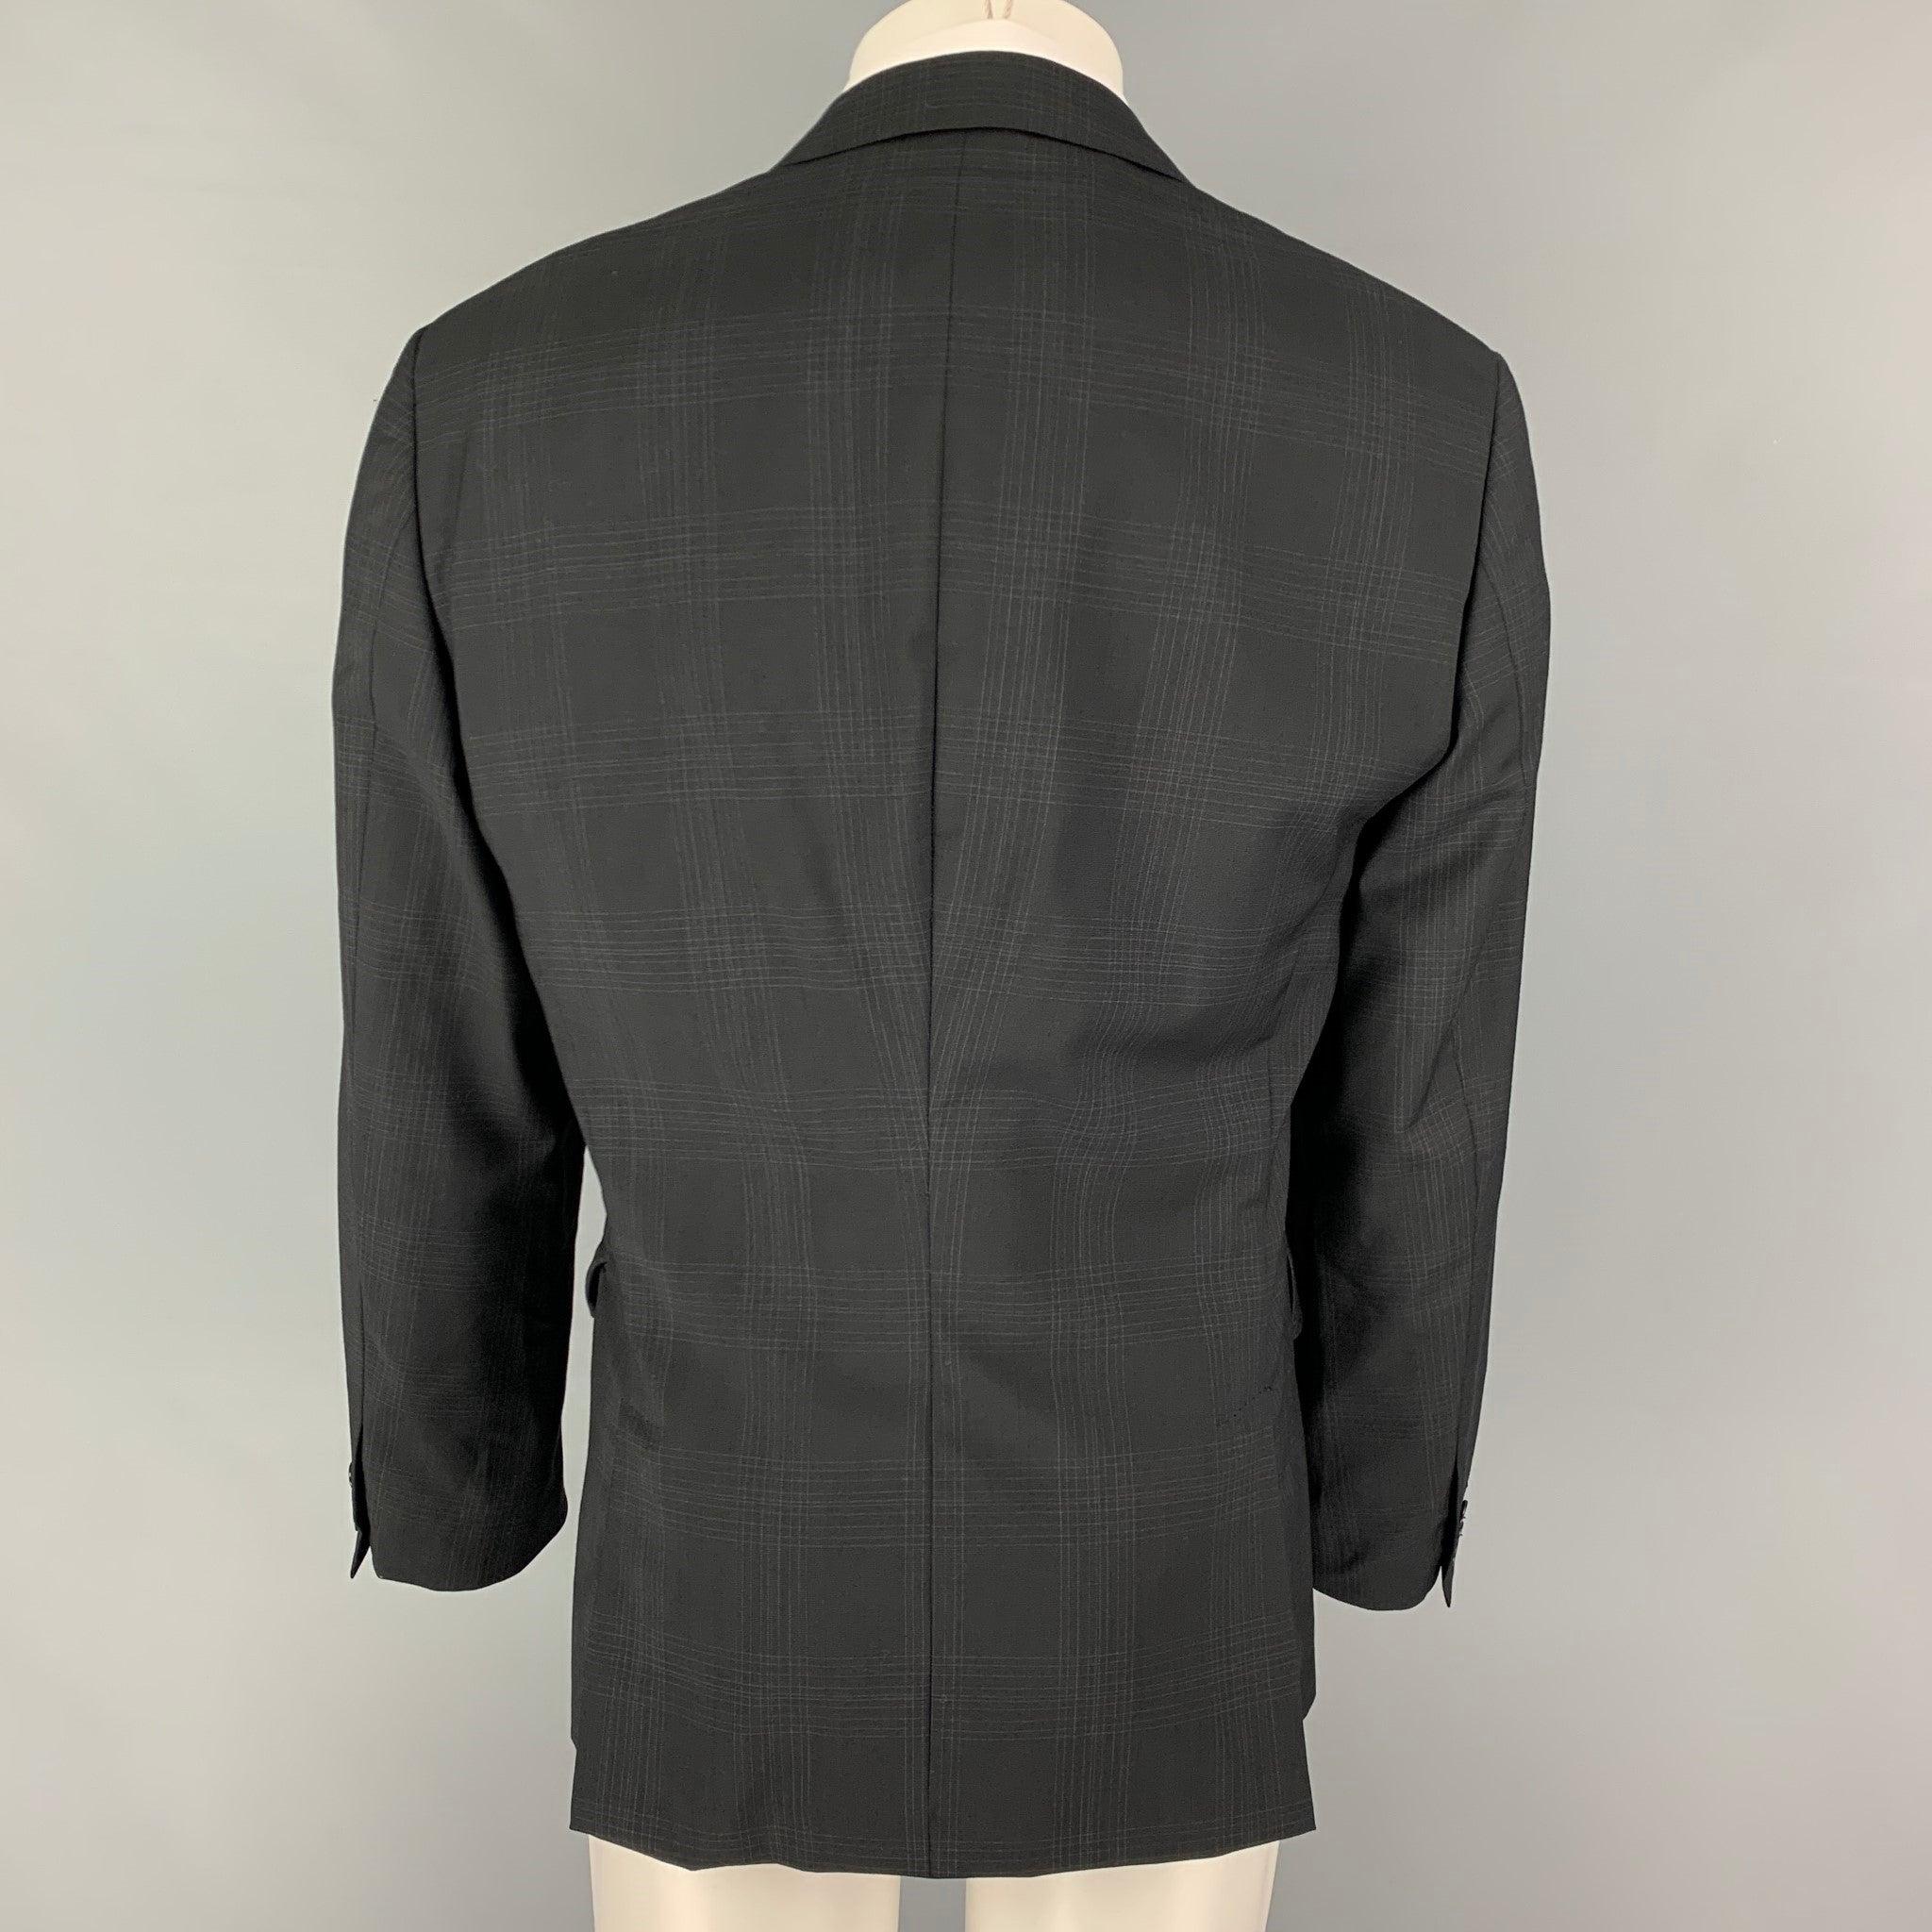 JOHN VARVATOS Size 40 Black Plaid Wool Notch Lapel Sport Coat In Good Condition For Sale In San Francisco, CA